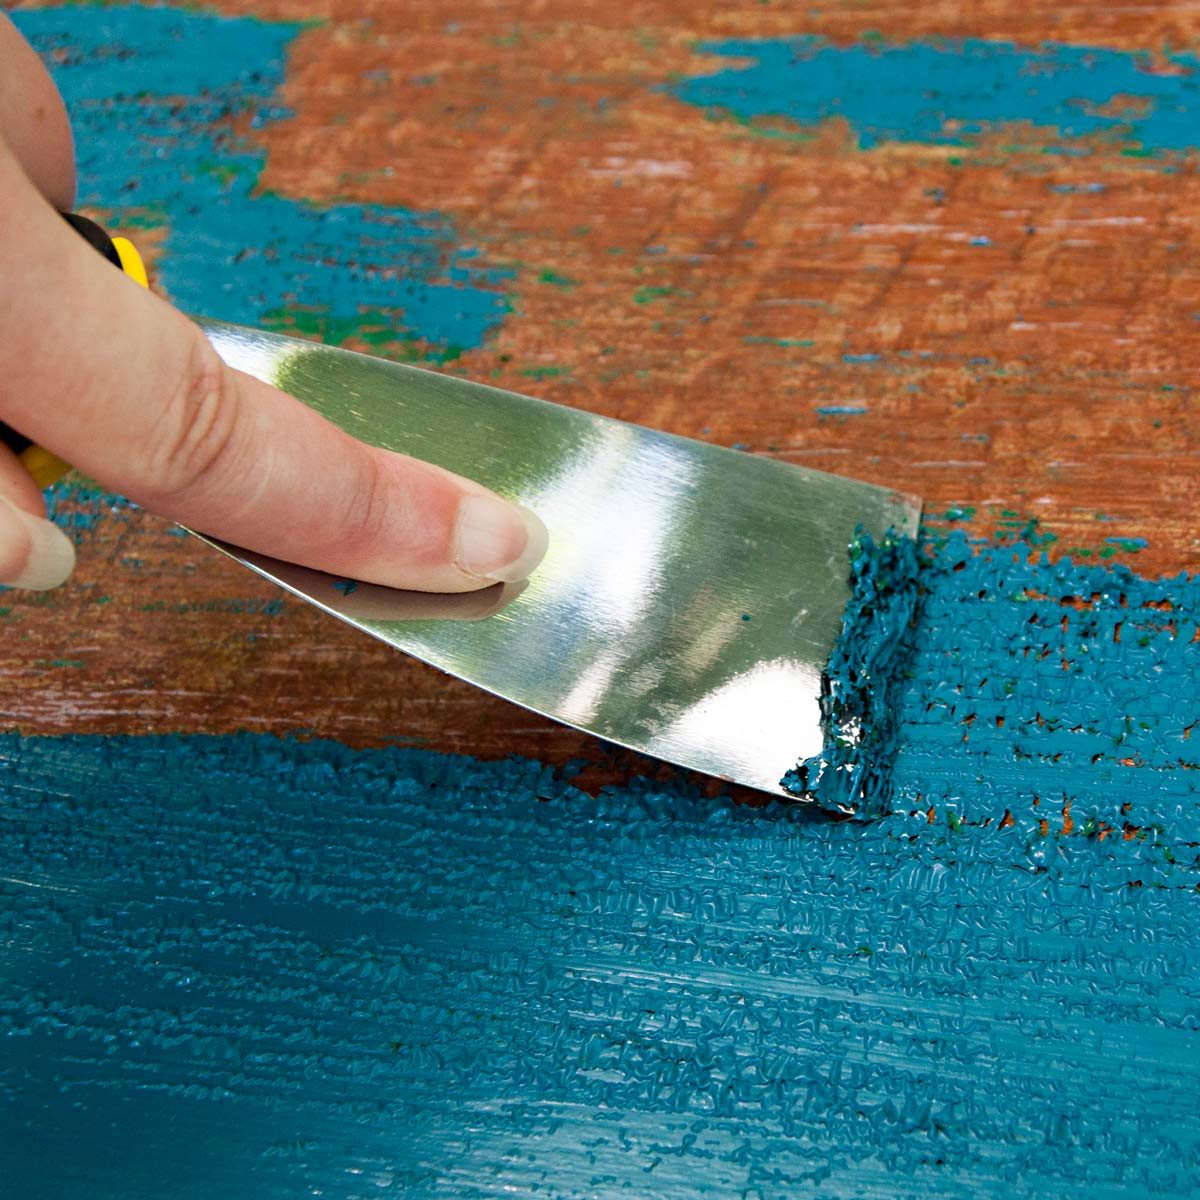 How to strip paint from wood safely